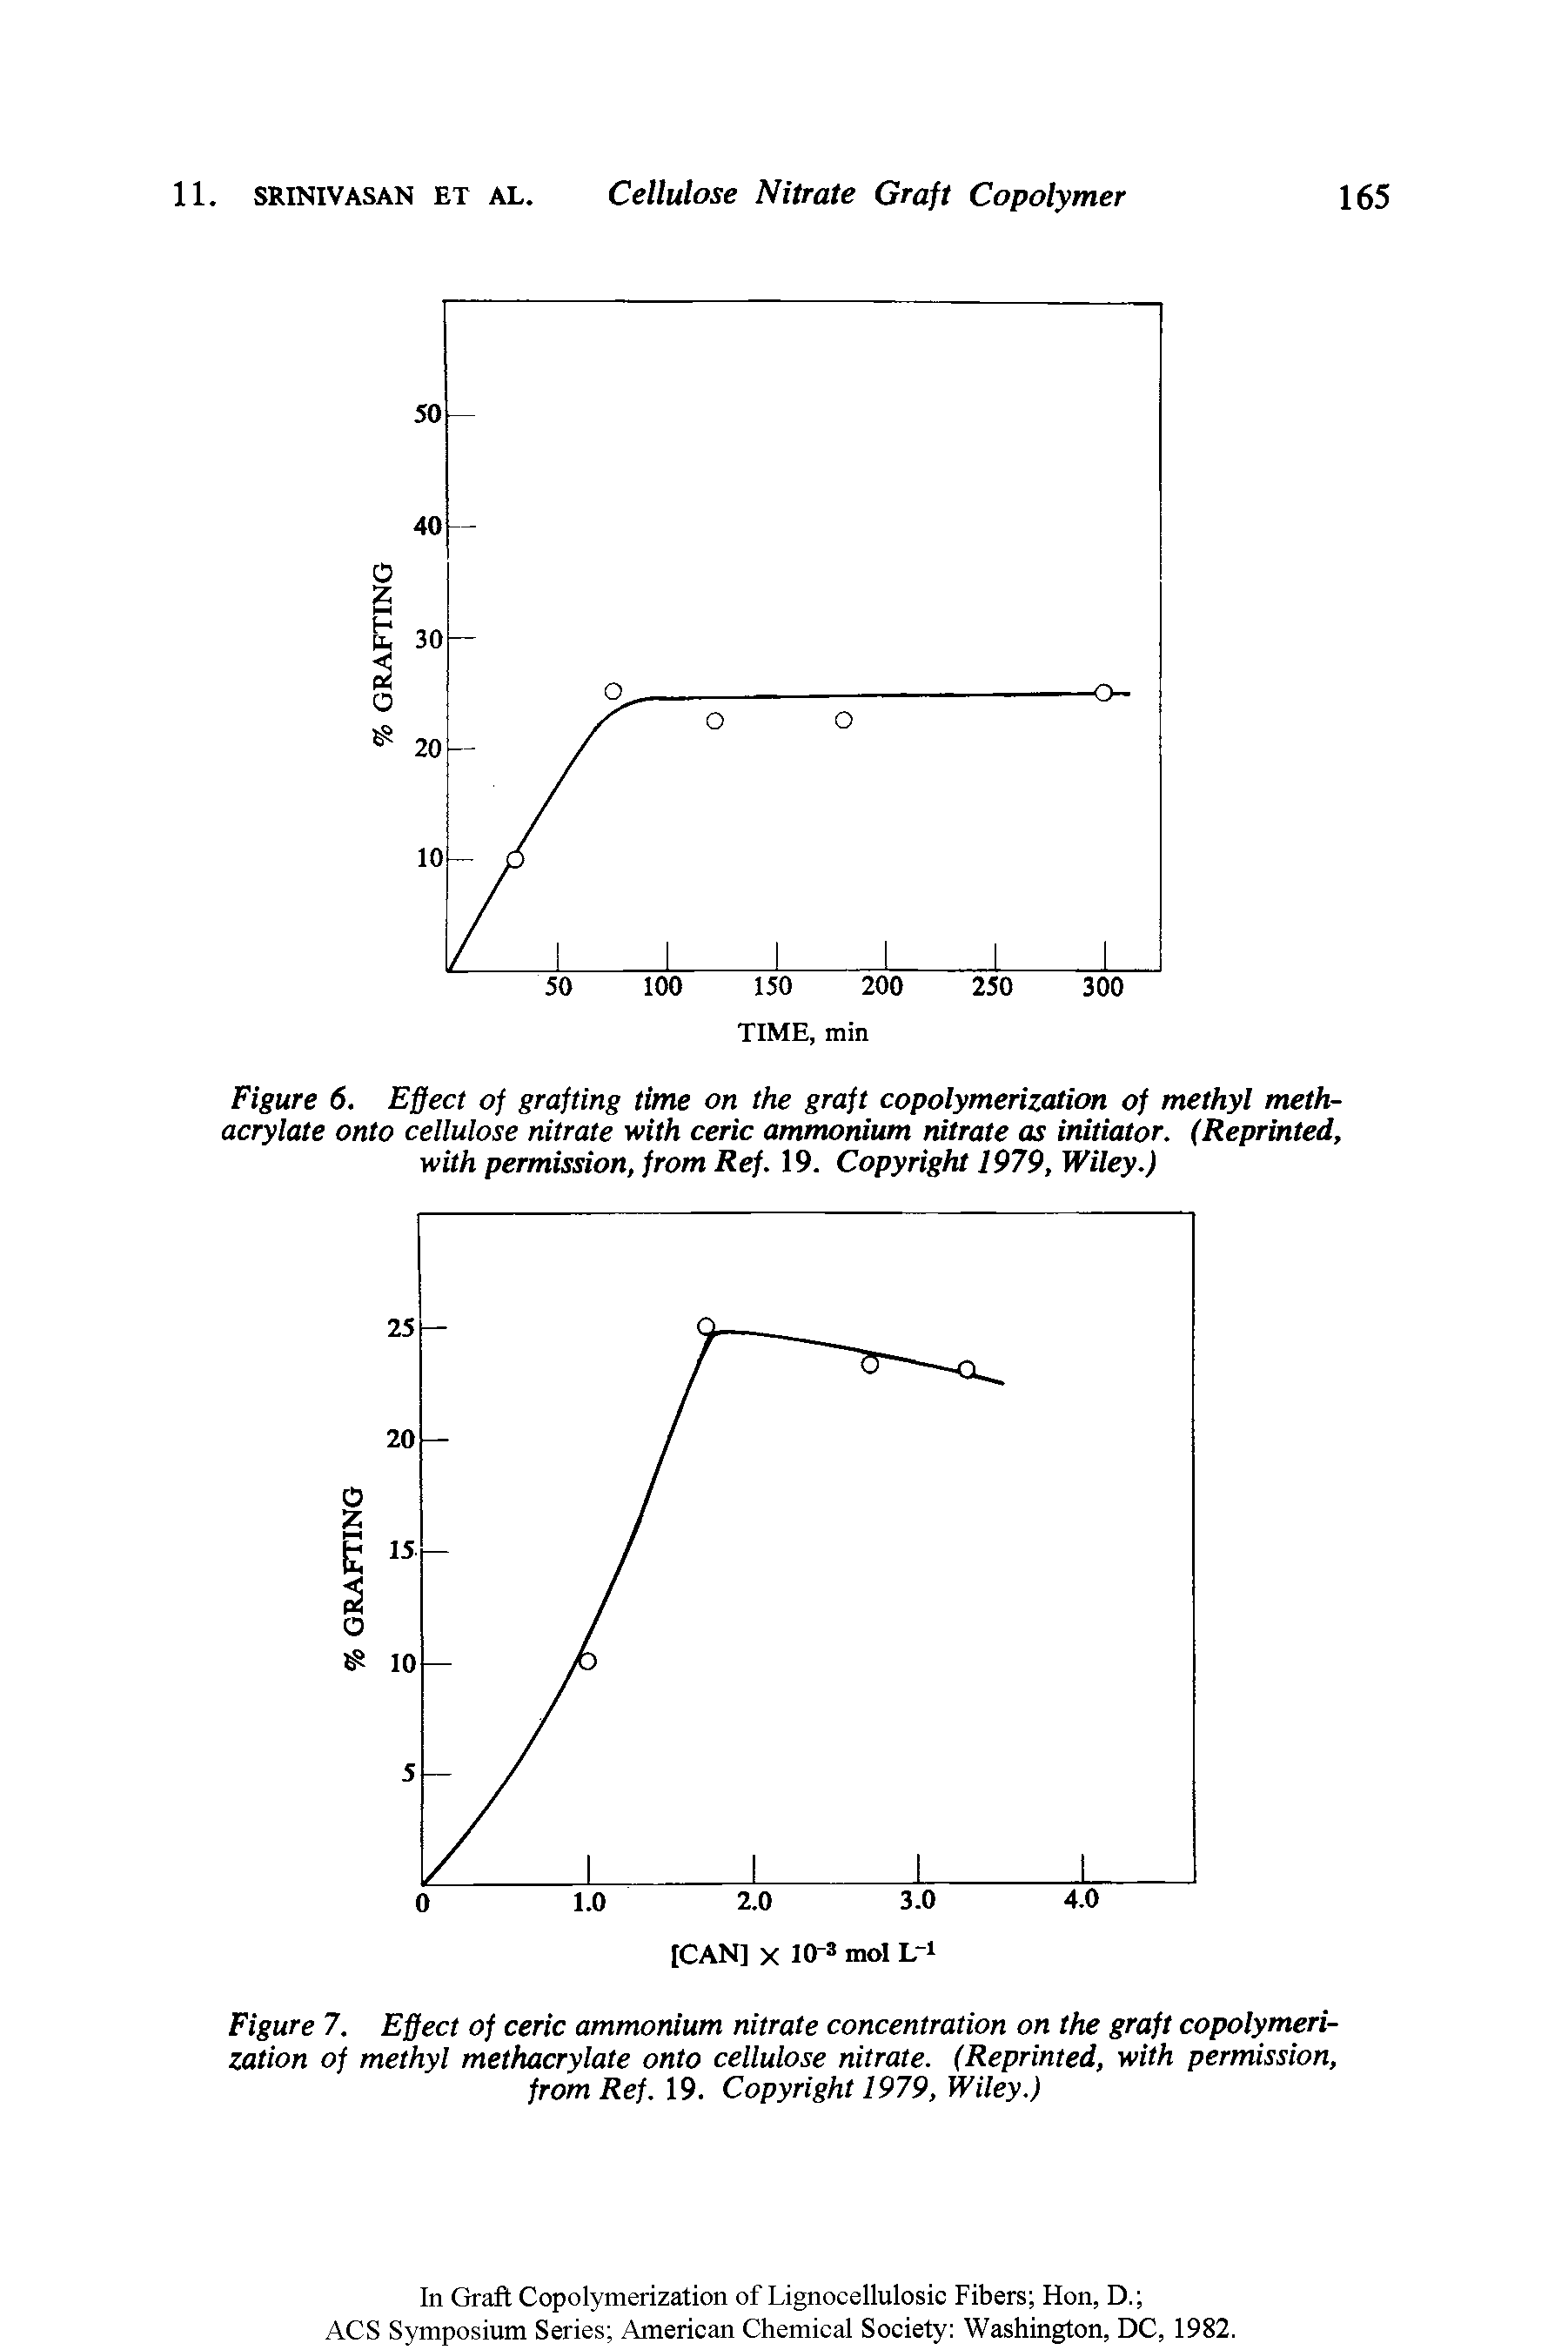 Figure 6. Effect of grafting time on the graft copolymerization of methyl methacrylate onto cellulose nitrate with ceric ammonium nitrate as initiator. (Reprinted, with permission, from Ref. 19. Copyright 1979, Wiley.)...